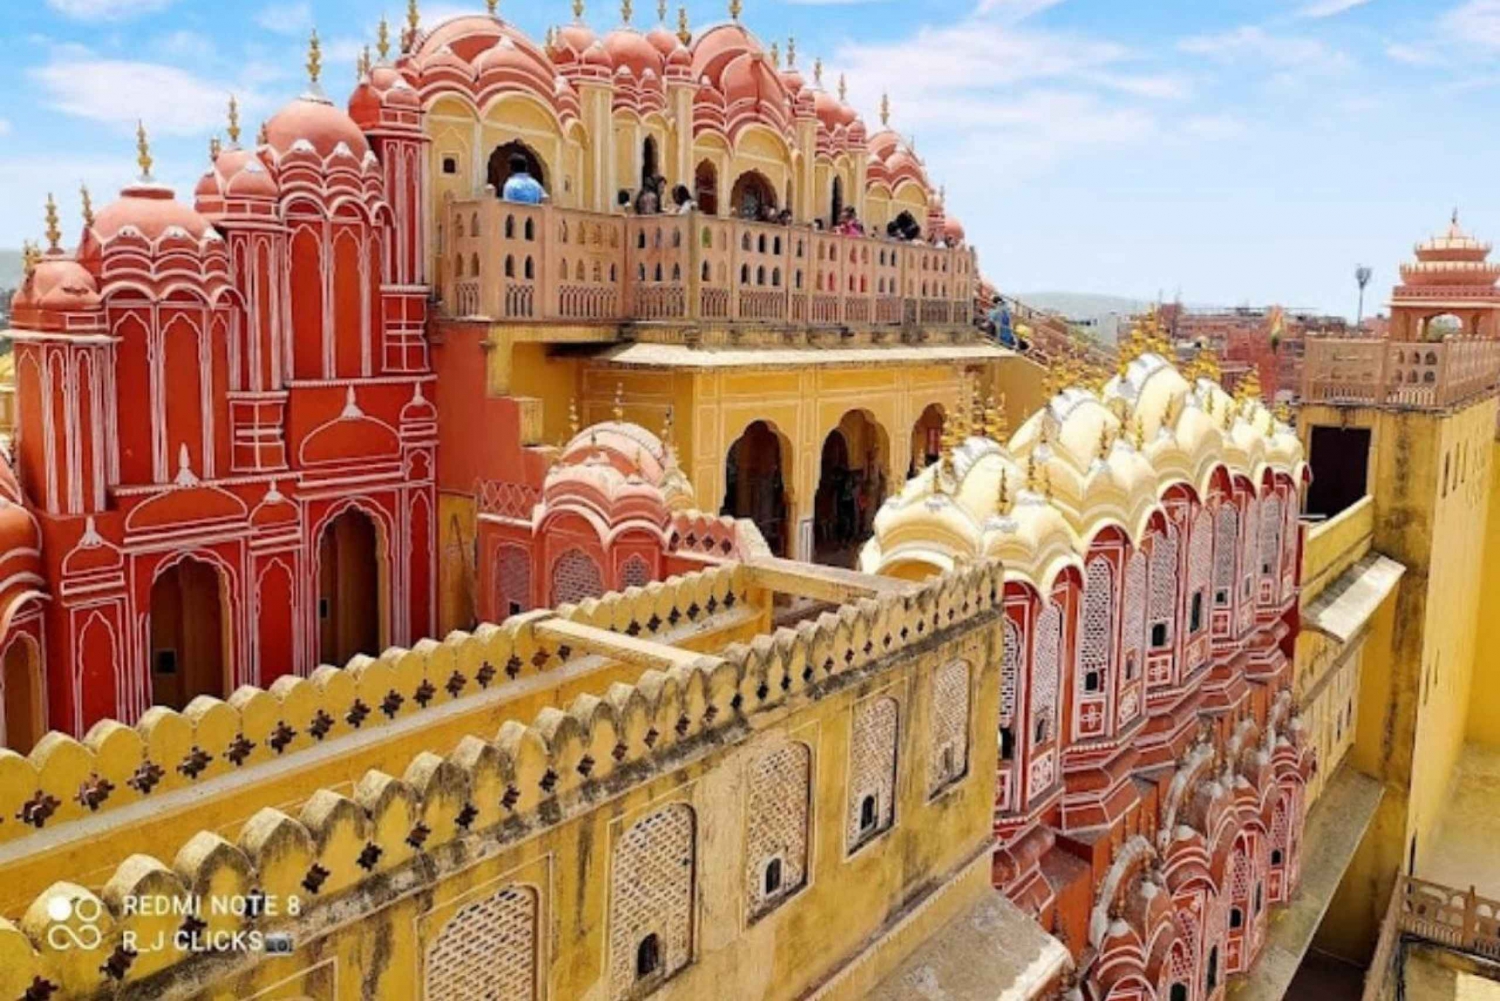 Full-Day Jaipur (Pink City) Sightseeing Guided Tour by Car